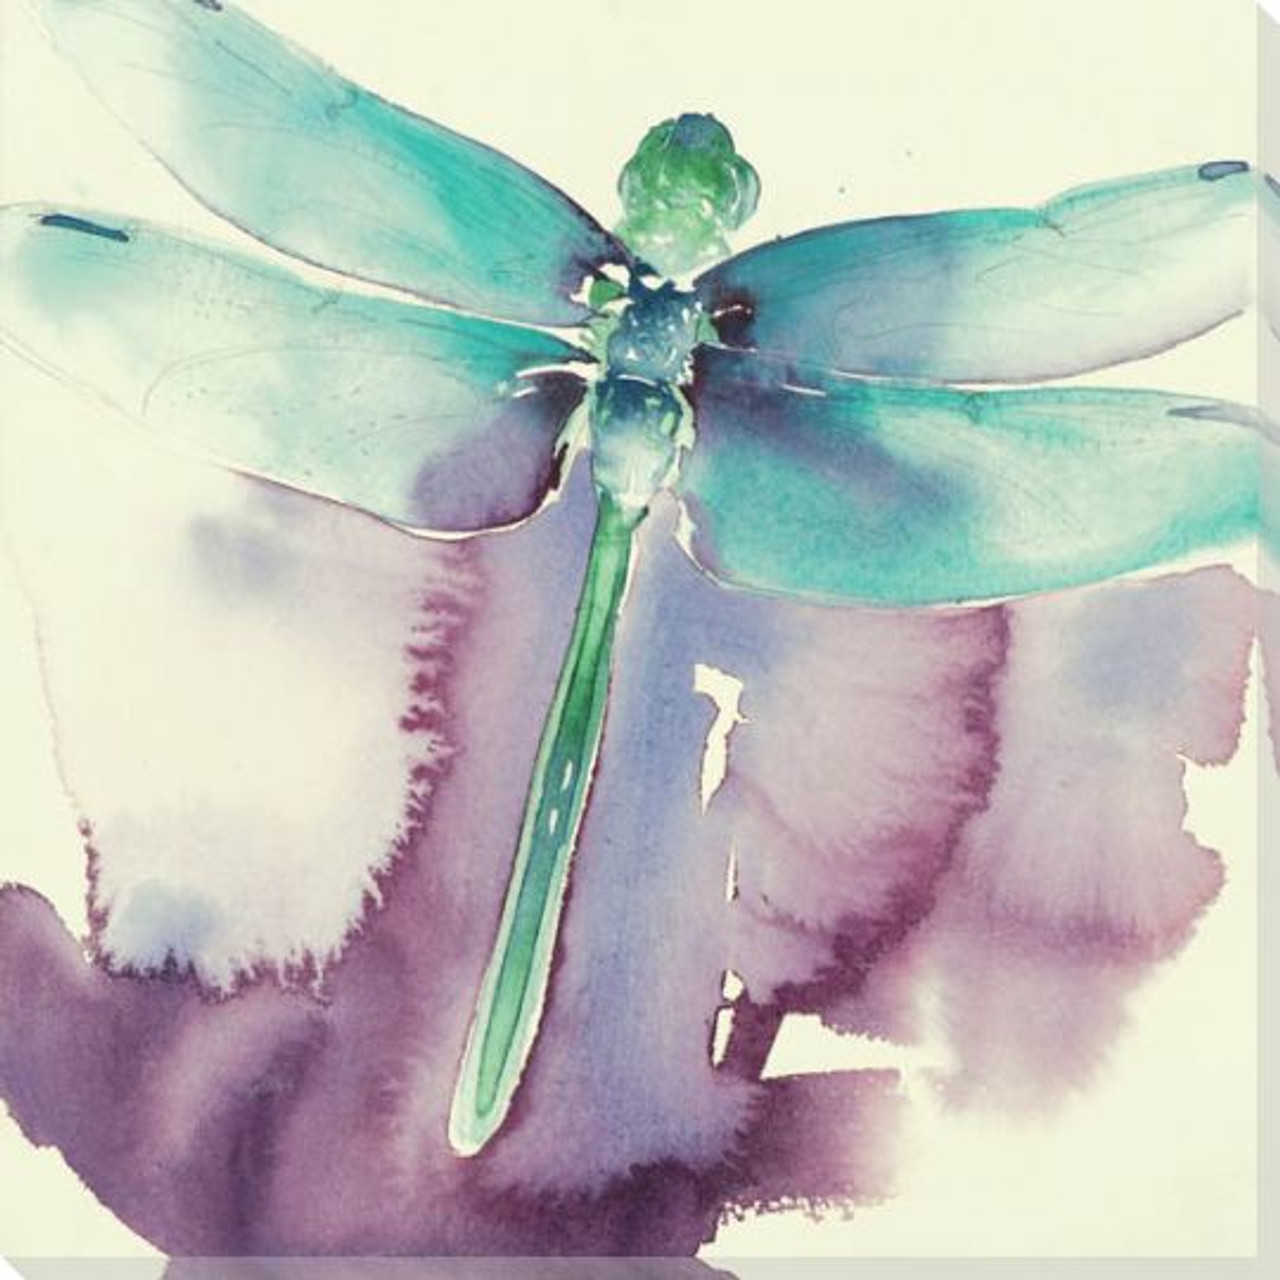 Dragonfly Watercolor illustrations Art Print Wall Art Poster Giclee Wall Decor 